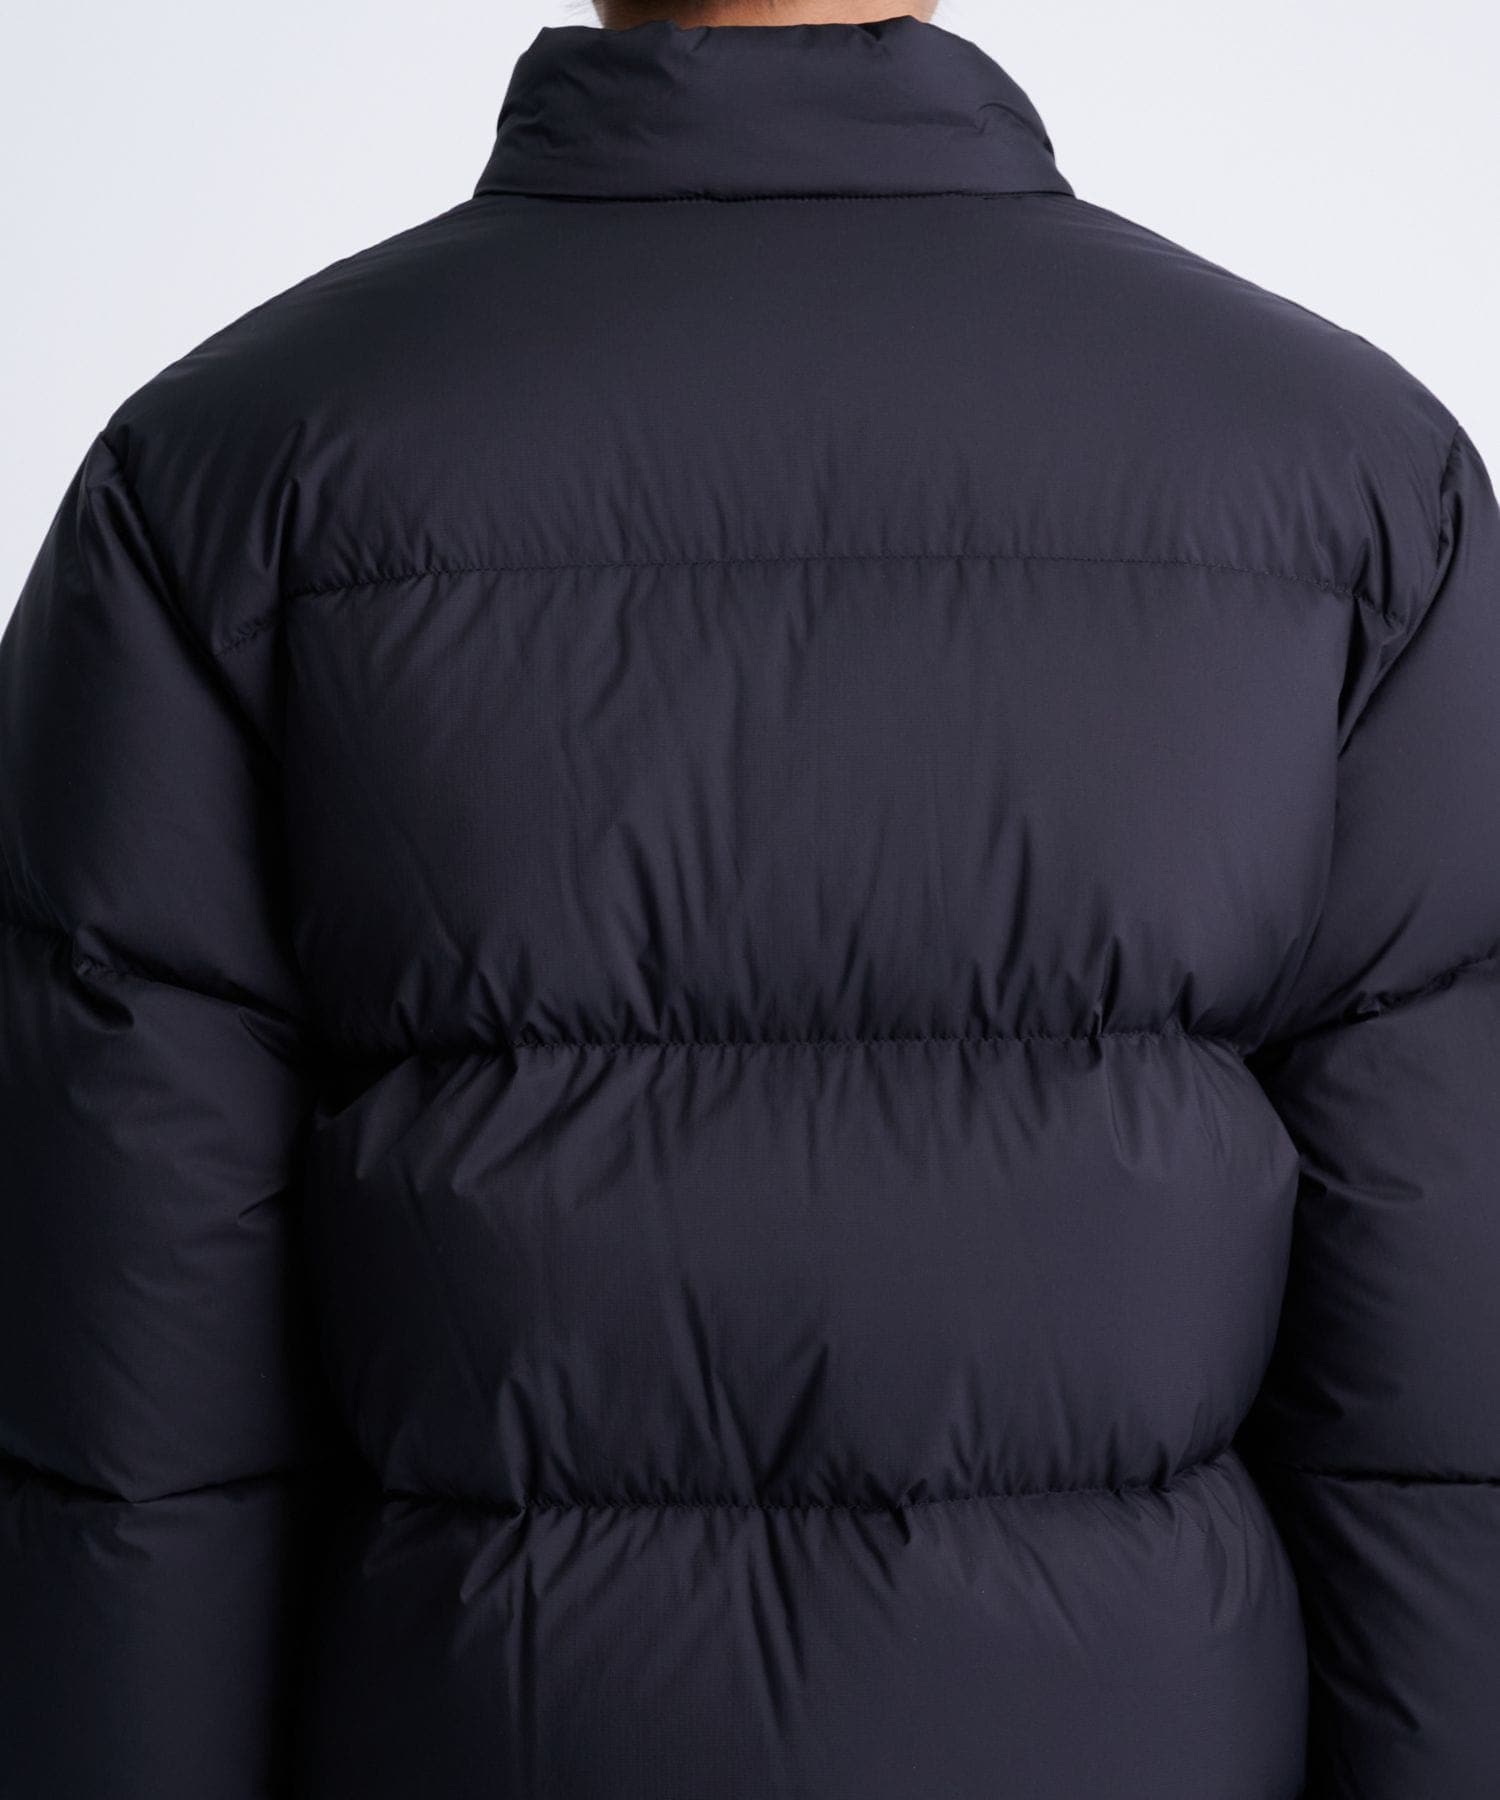 Down Jacket｜BED J.W. FORD